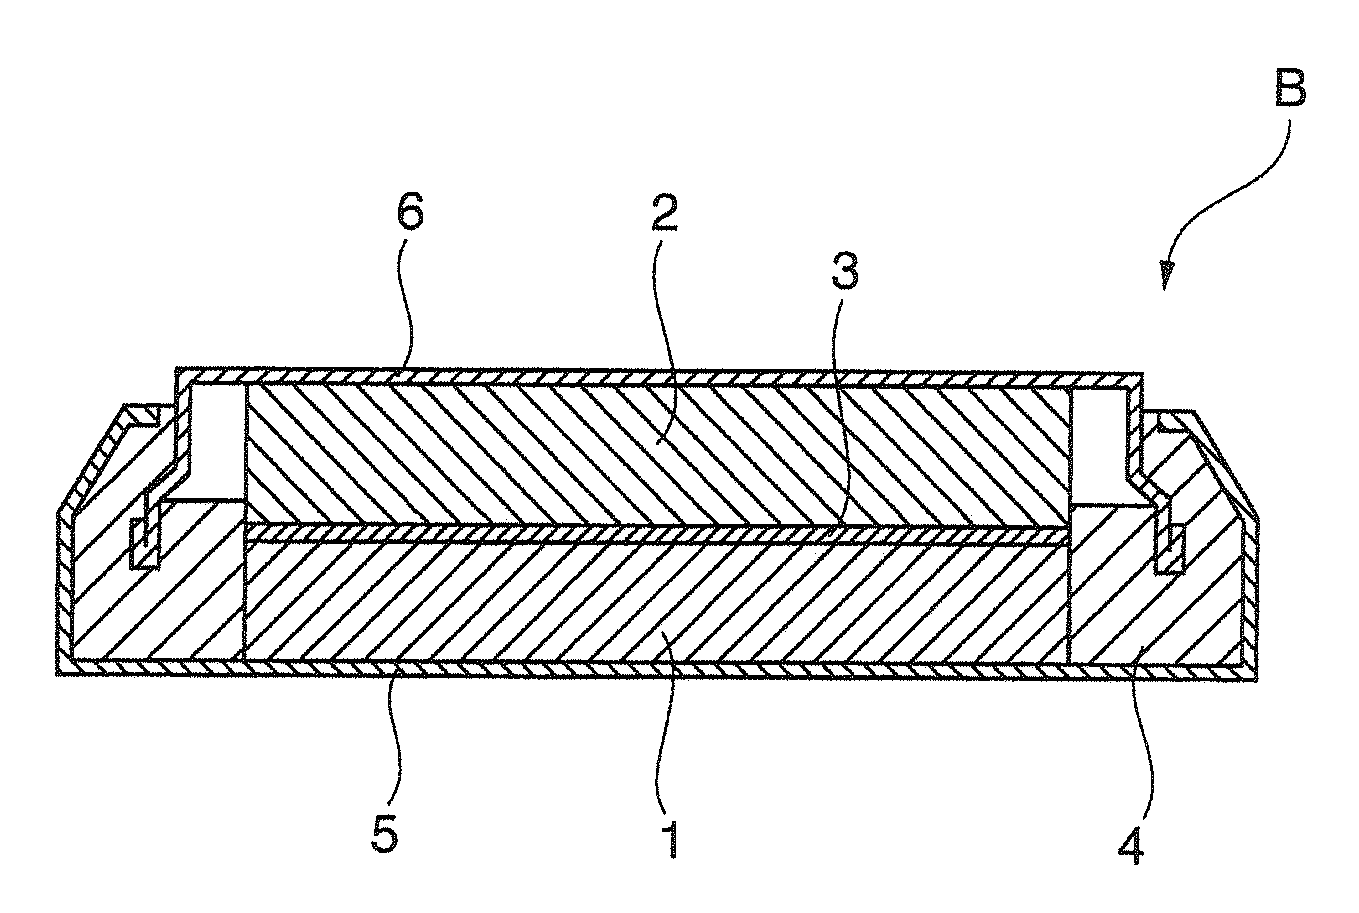 Transition metal composite hydroxide capable of serving as precursor of positive electrode active material for nonaqueous electrolyte secondary batteries, method for producing same, positive electrode active material for nonaqueous electrolyte secondary batteries, method for producing positive electrode active material, and nonaqueous electrolyte secondary battery using positive electrode active material